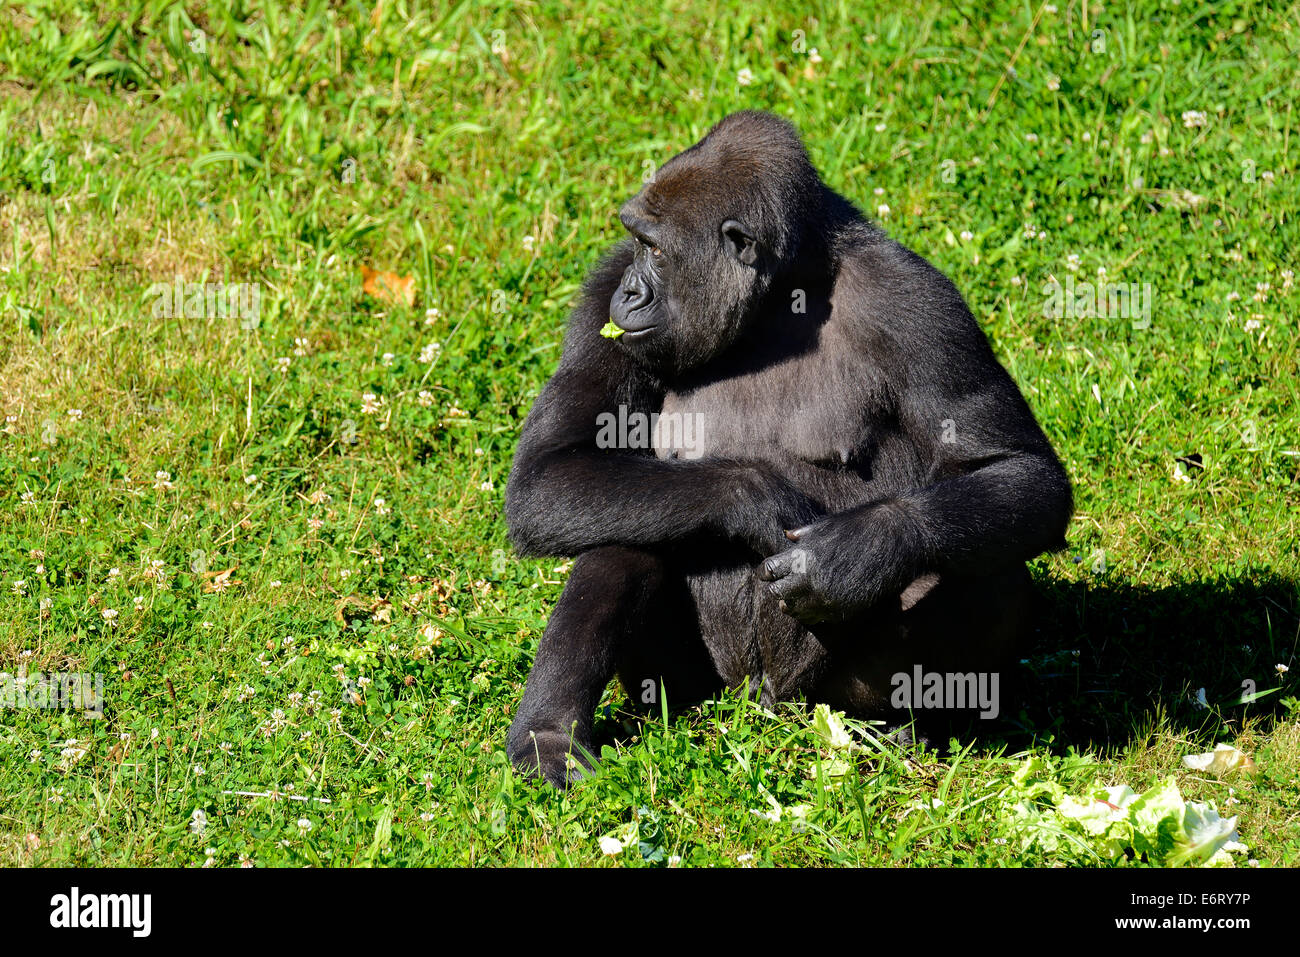 Female Western lowland gorilla and her baby gorilla in the Natural Park of Cabarceno, Cabarceno, Cantabria, Spain, Europe Stock Photo